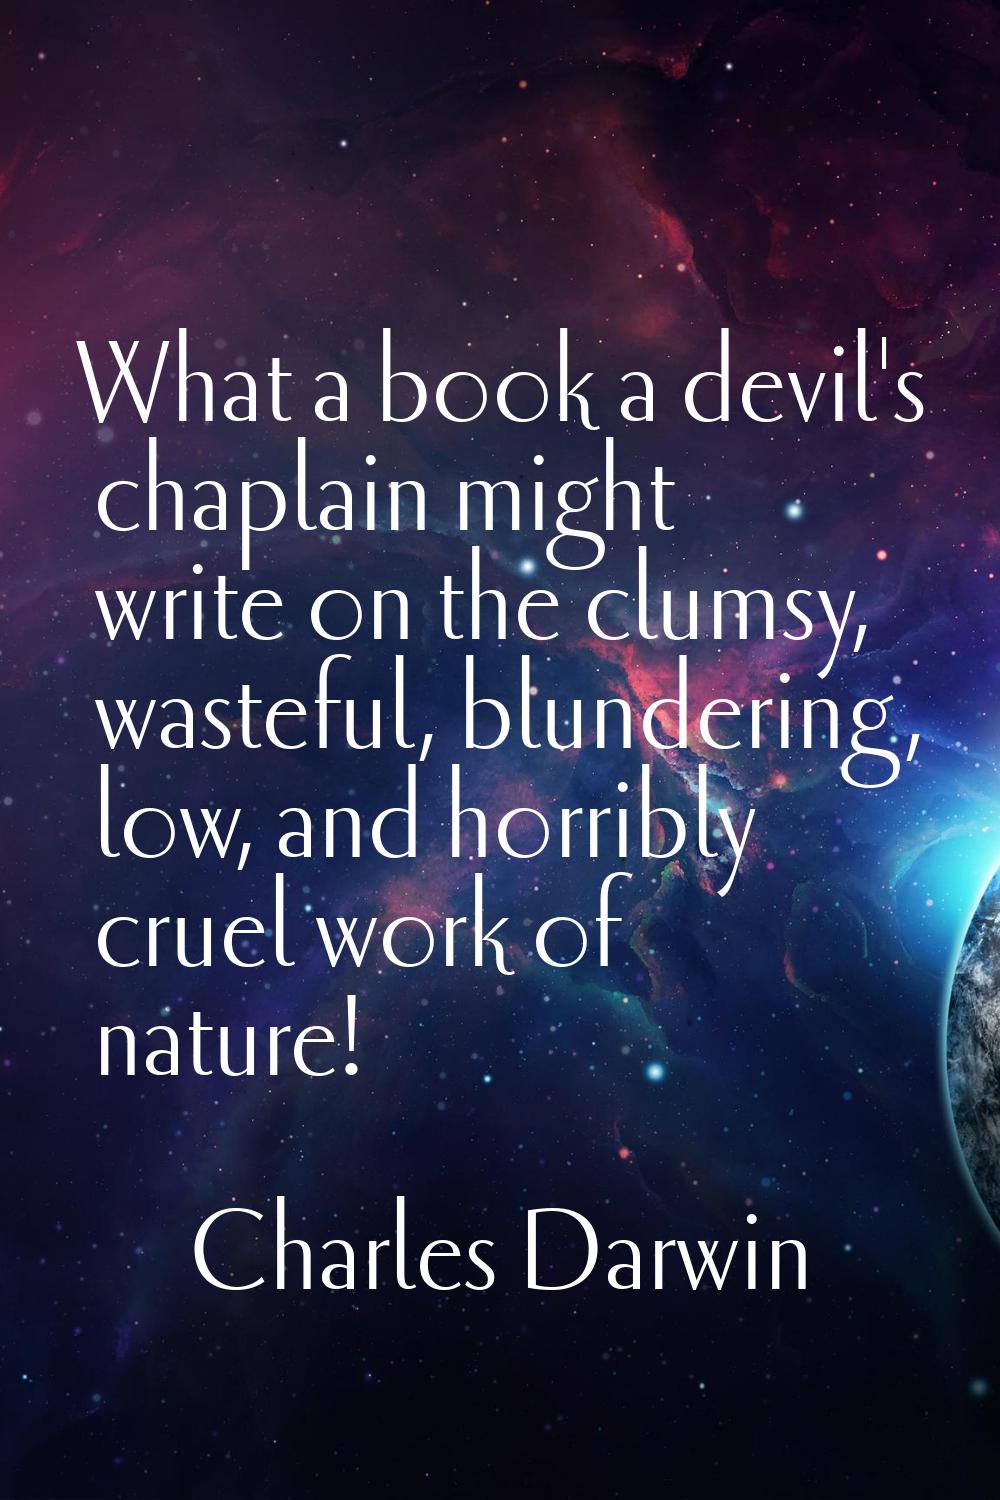 What a book a devil's chaplain might write on the clumsy, wasteful, blundering, low, and horribly c